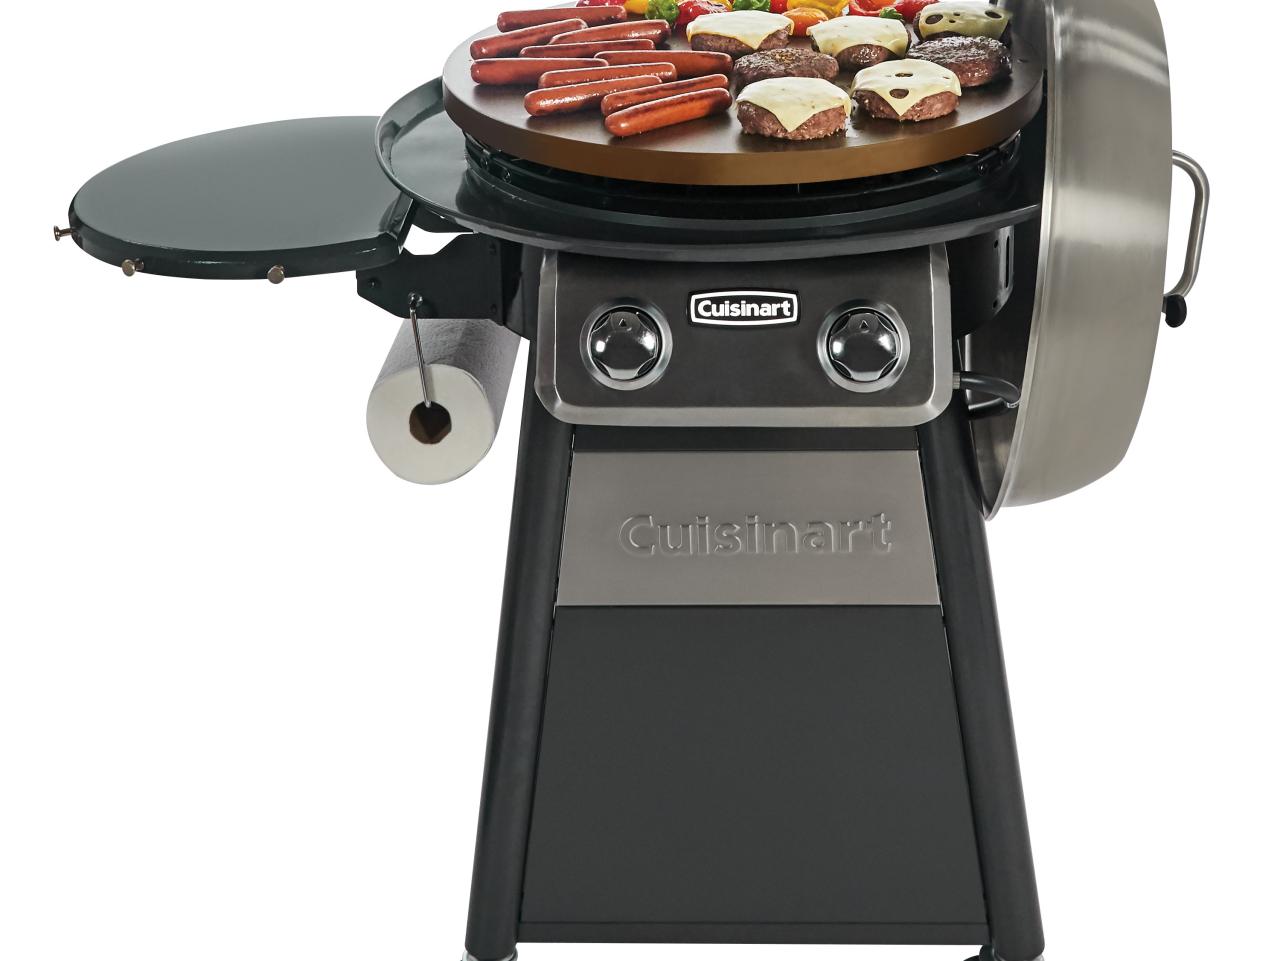 https://food.fnr.sndimg.com/content/dam/images/food/products/2019/7/12/rx_cuisinart-360-griddle-cooking-center---cooking-versatility-cook-breakfast-lunch-and-dinner-22-inch-diameter-cooking-surface-includes-stainless-steel-lid.jpeg.rend.hgtvcom.1280.960.suffix/1562946497313.jpeg